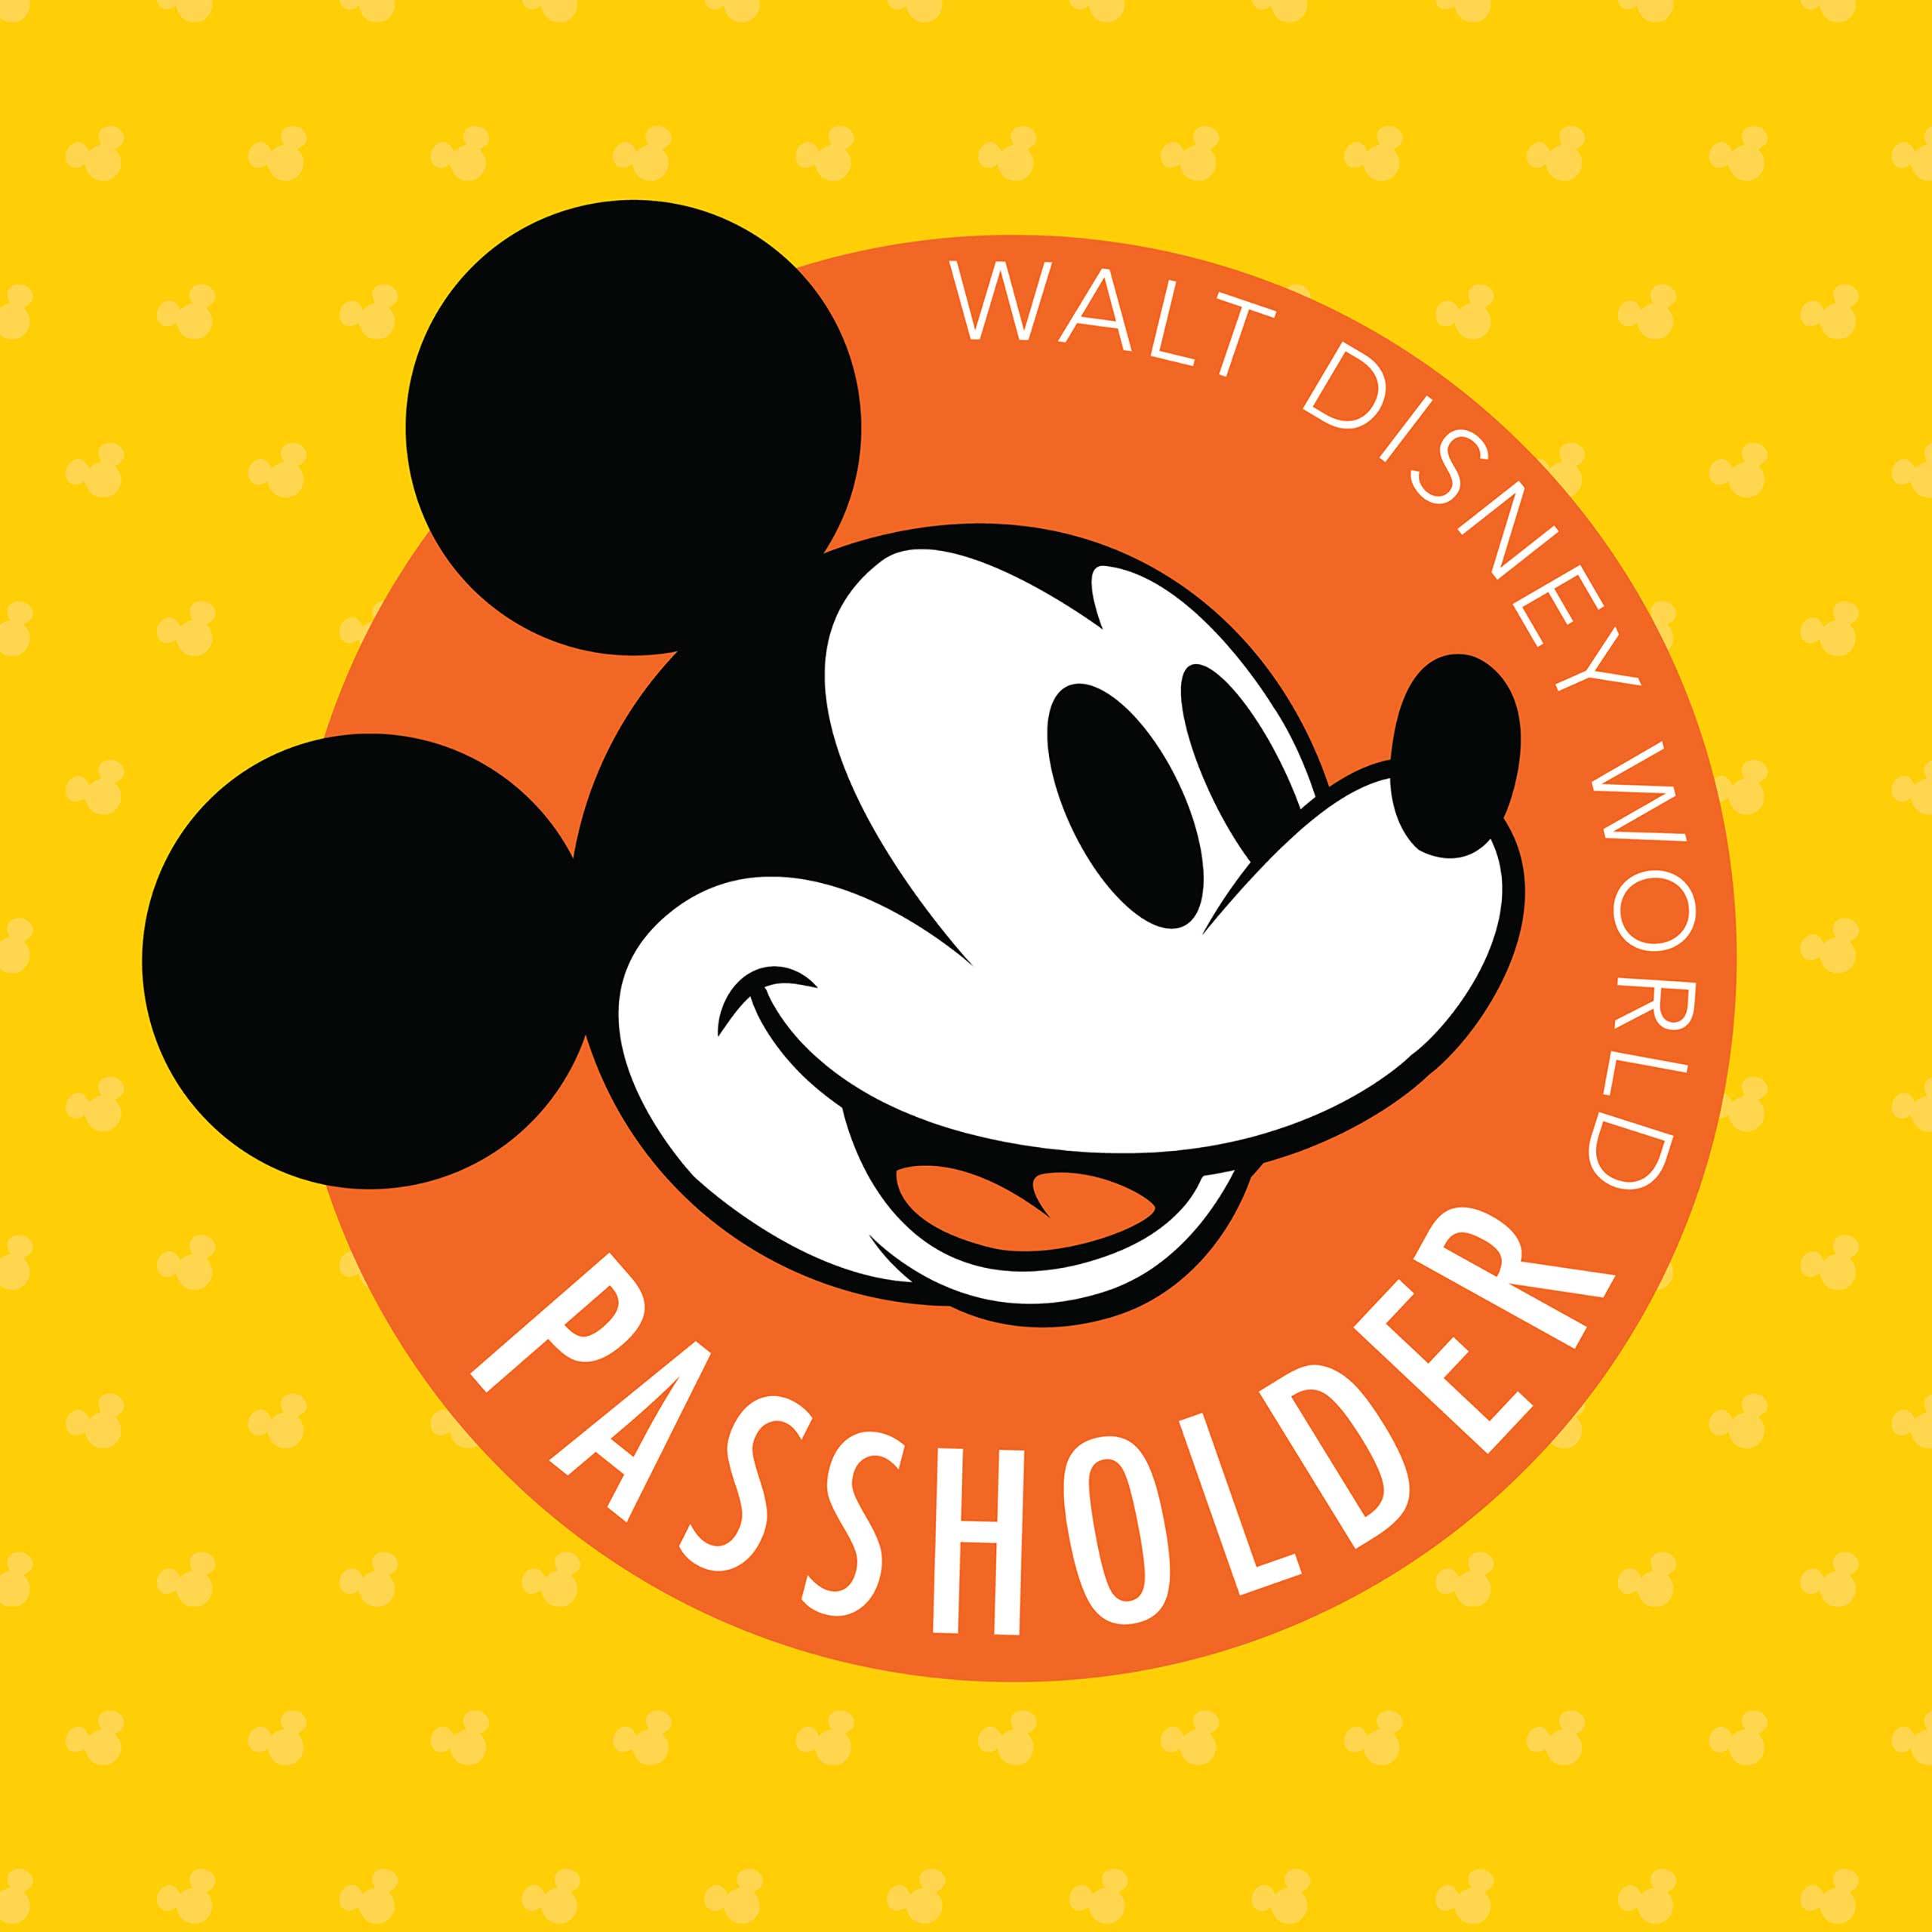 Annual Passholder pop-up shop coming to EPCOT's Germany pavilion